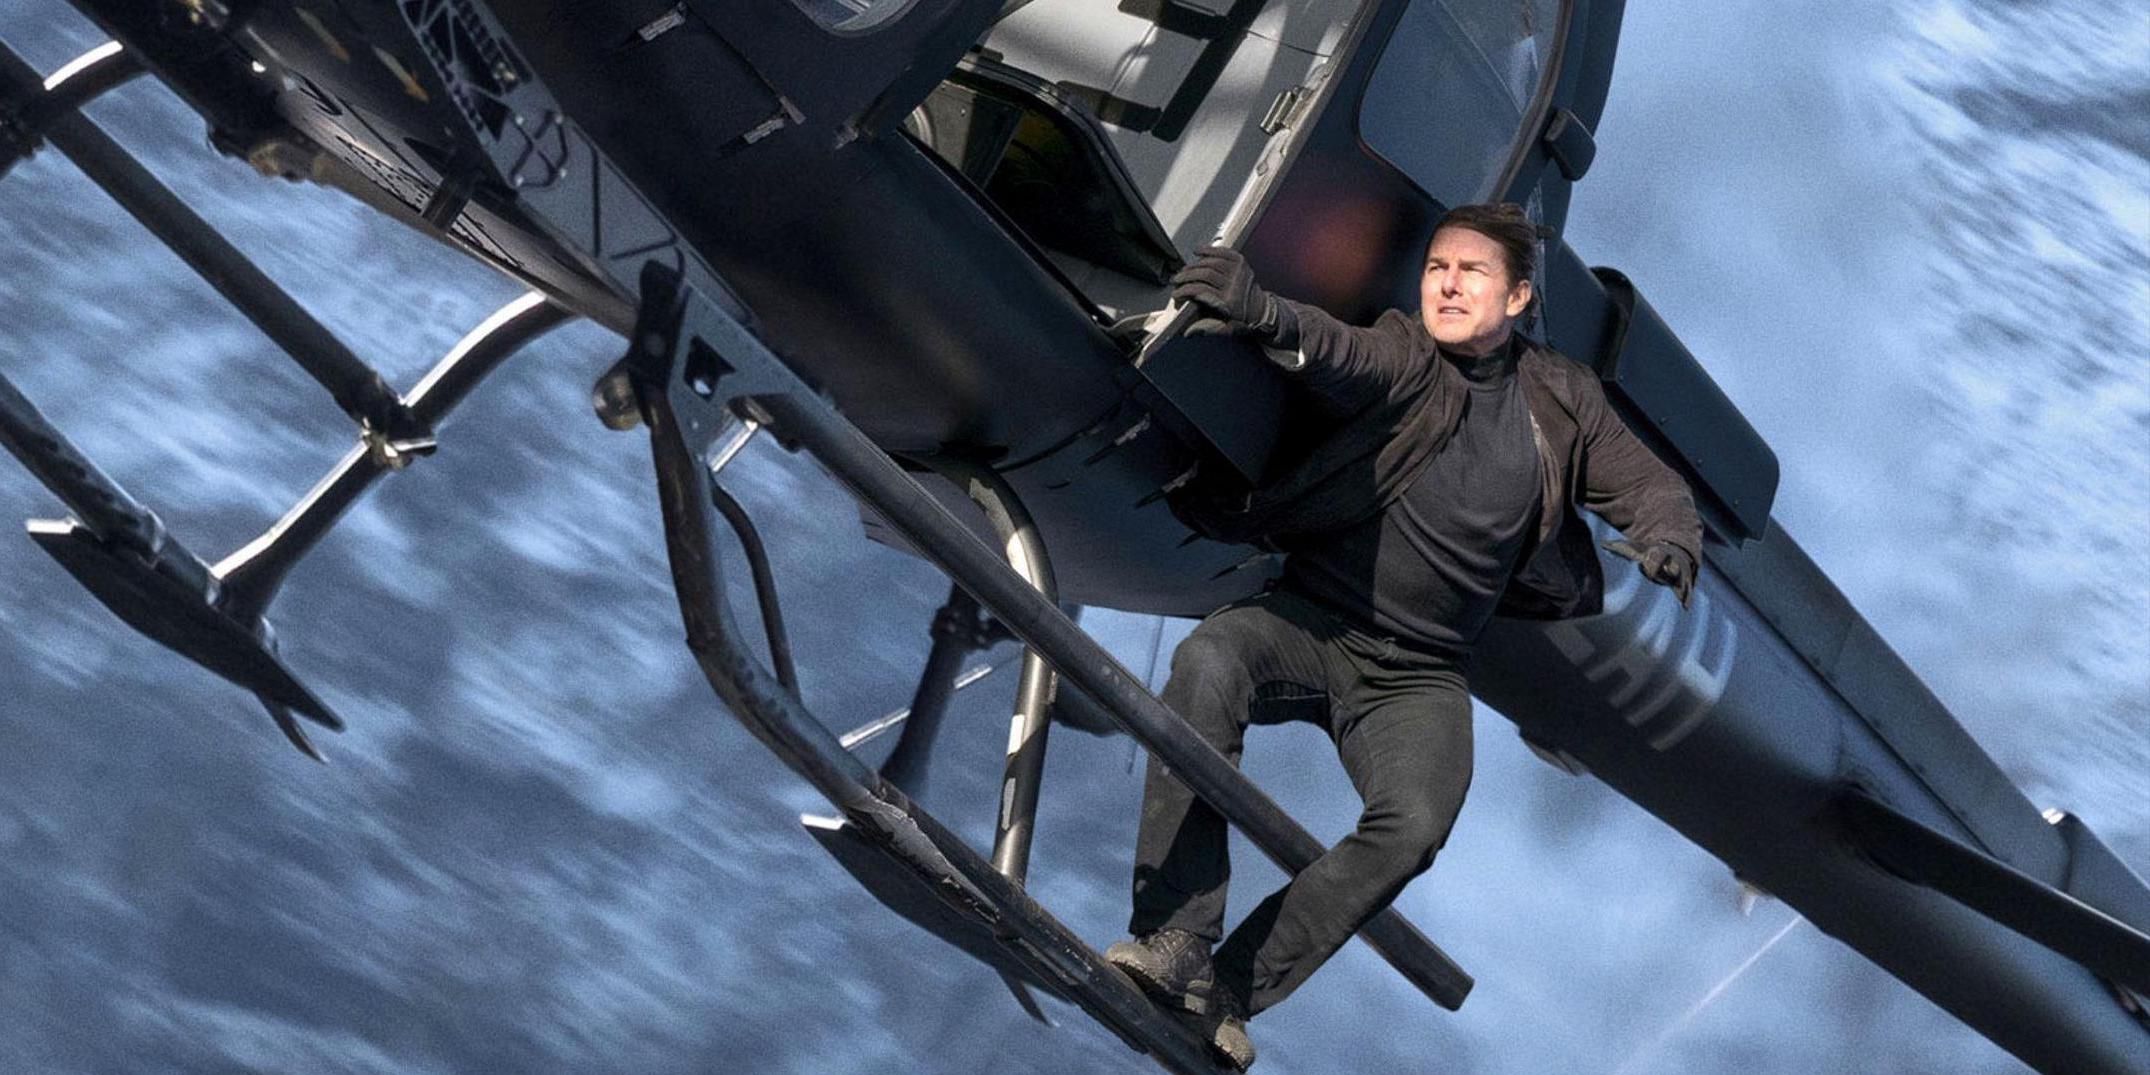 Tom Cruise hanging onto the outside of the helicopter in Mission Impossible Fallout